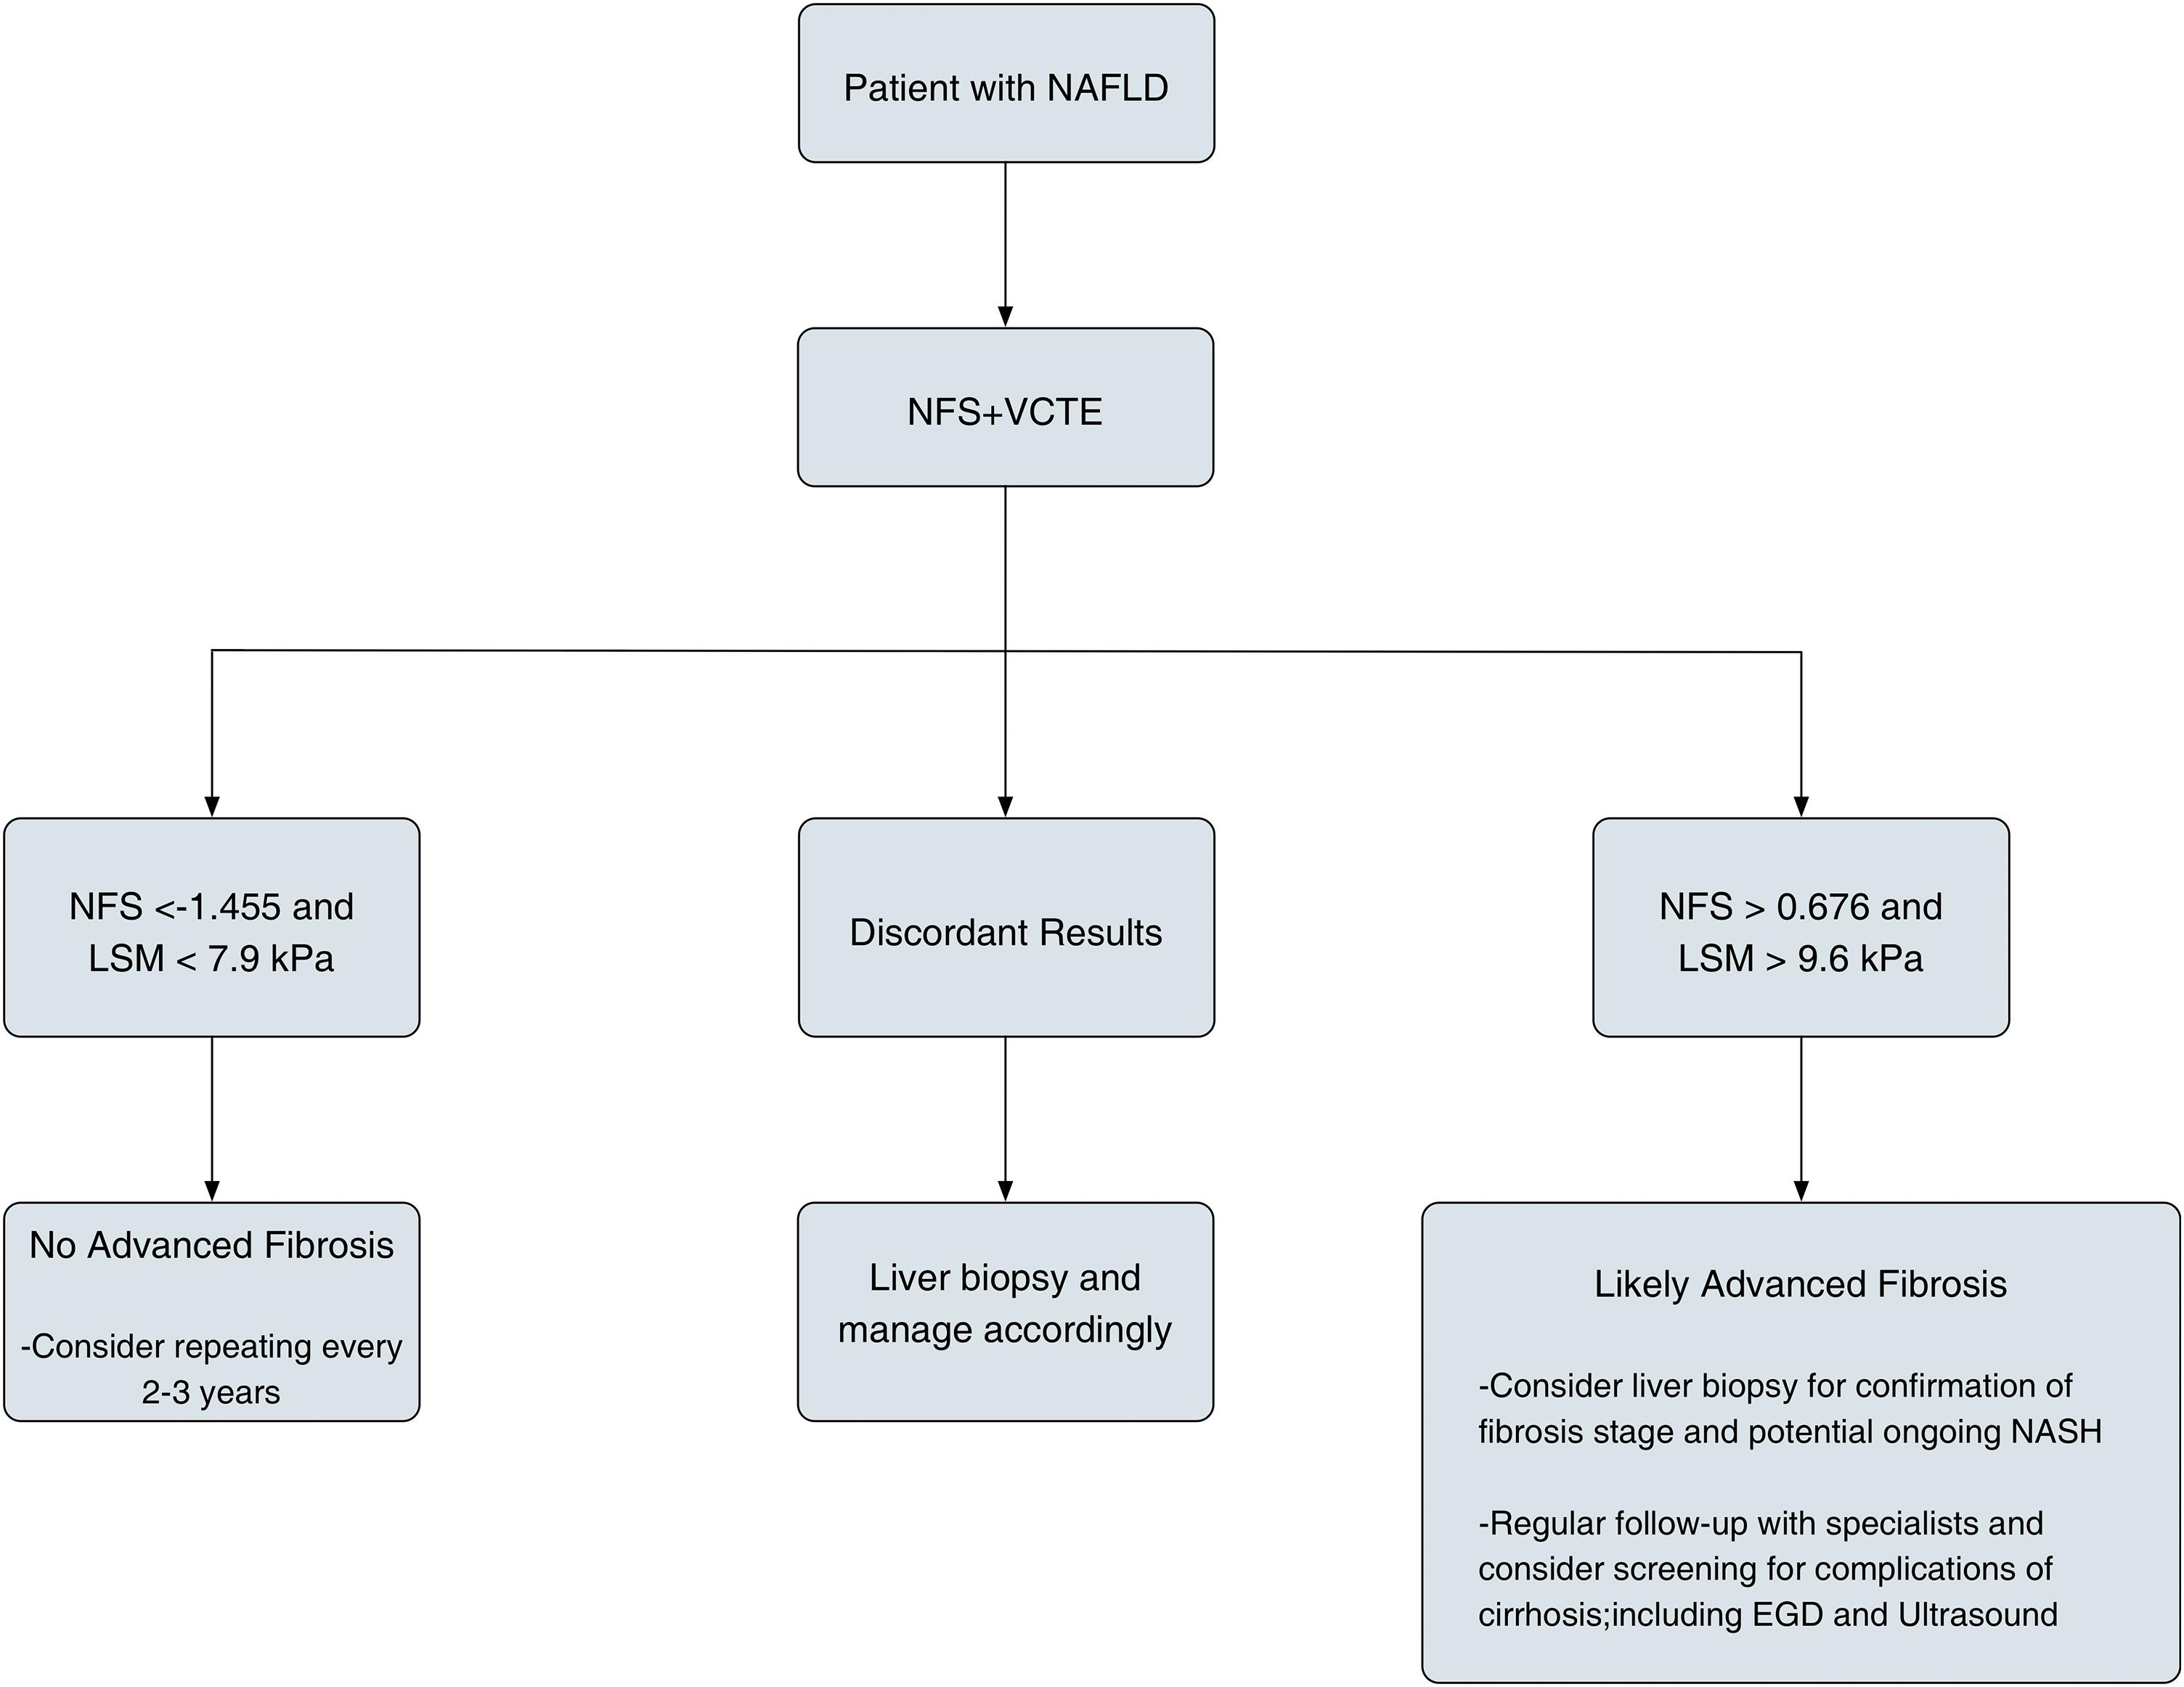 Proposed algorithm for assessing NAFLD patients for advanced fibrosis.